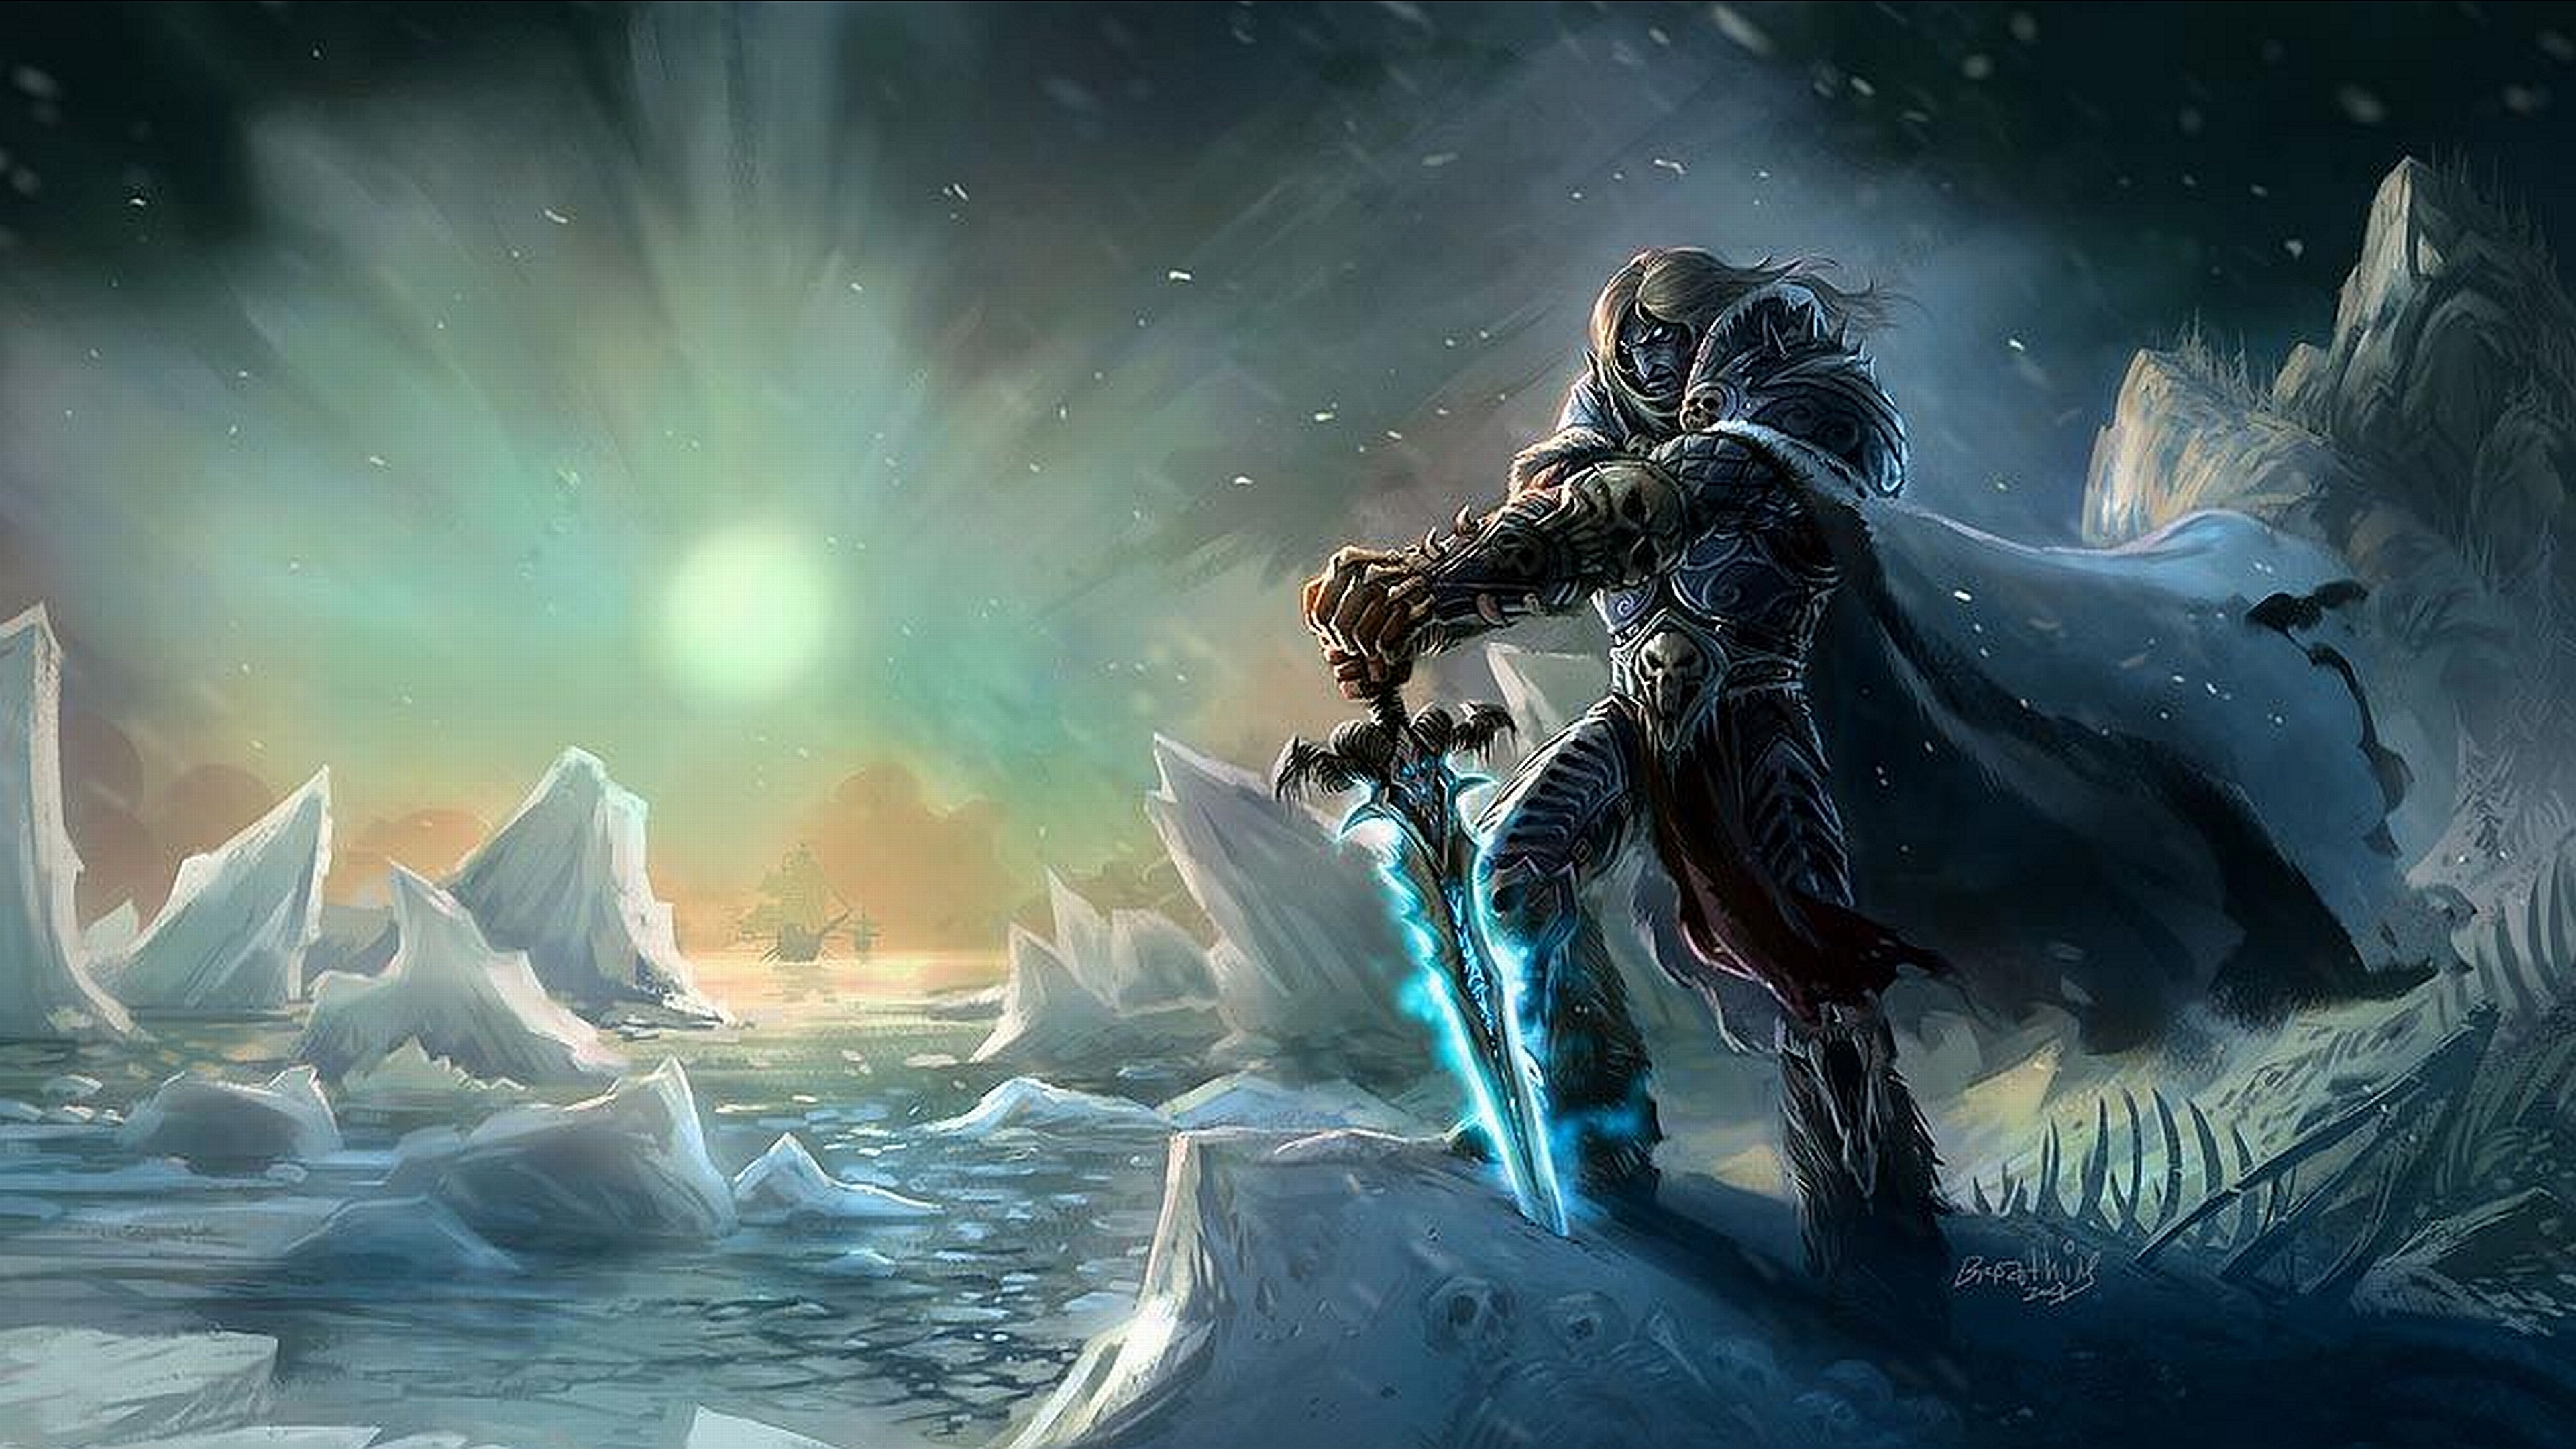 10 New World Of Warcraft Backgrounds 1920x1080 Full Hd 1080p For Pc